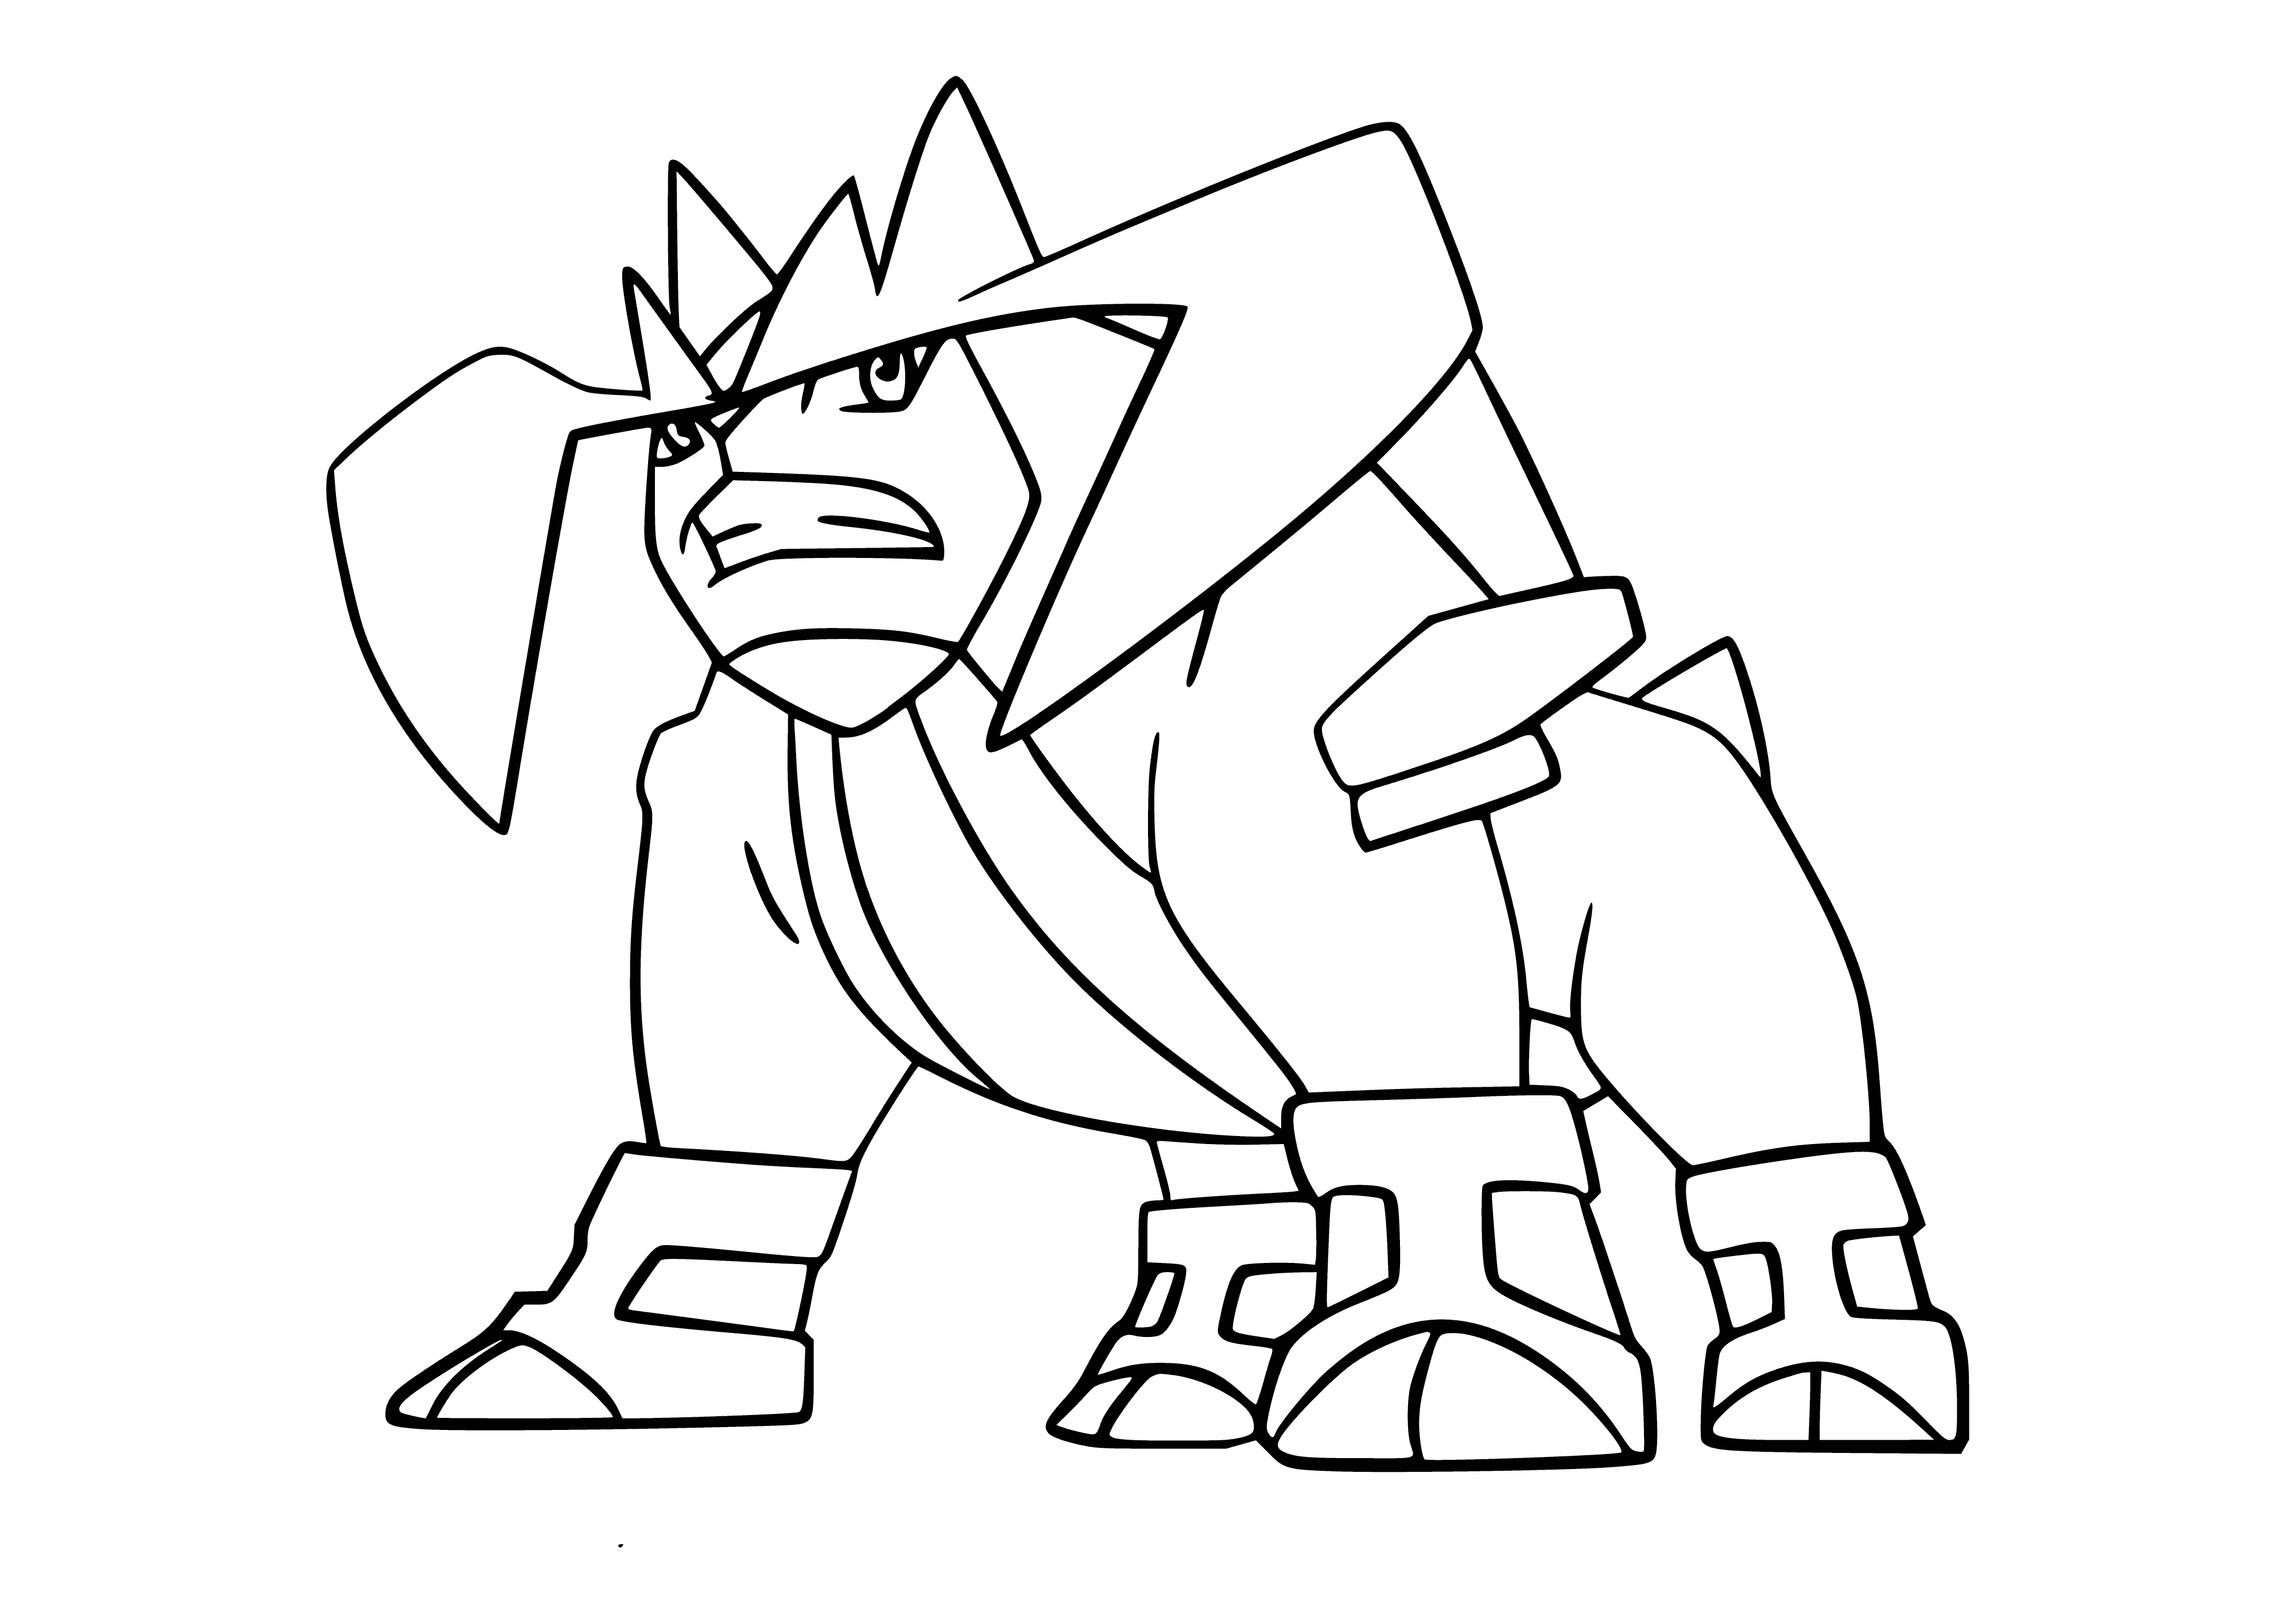 coloring page: Legendary Pokémon Terrakion is a Rock/Fighting type, part of the Swords of Justice. Its rock-hard body can fire arrows of stone, said to have emerged from a meteor.